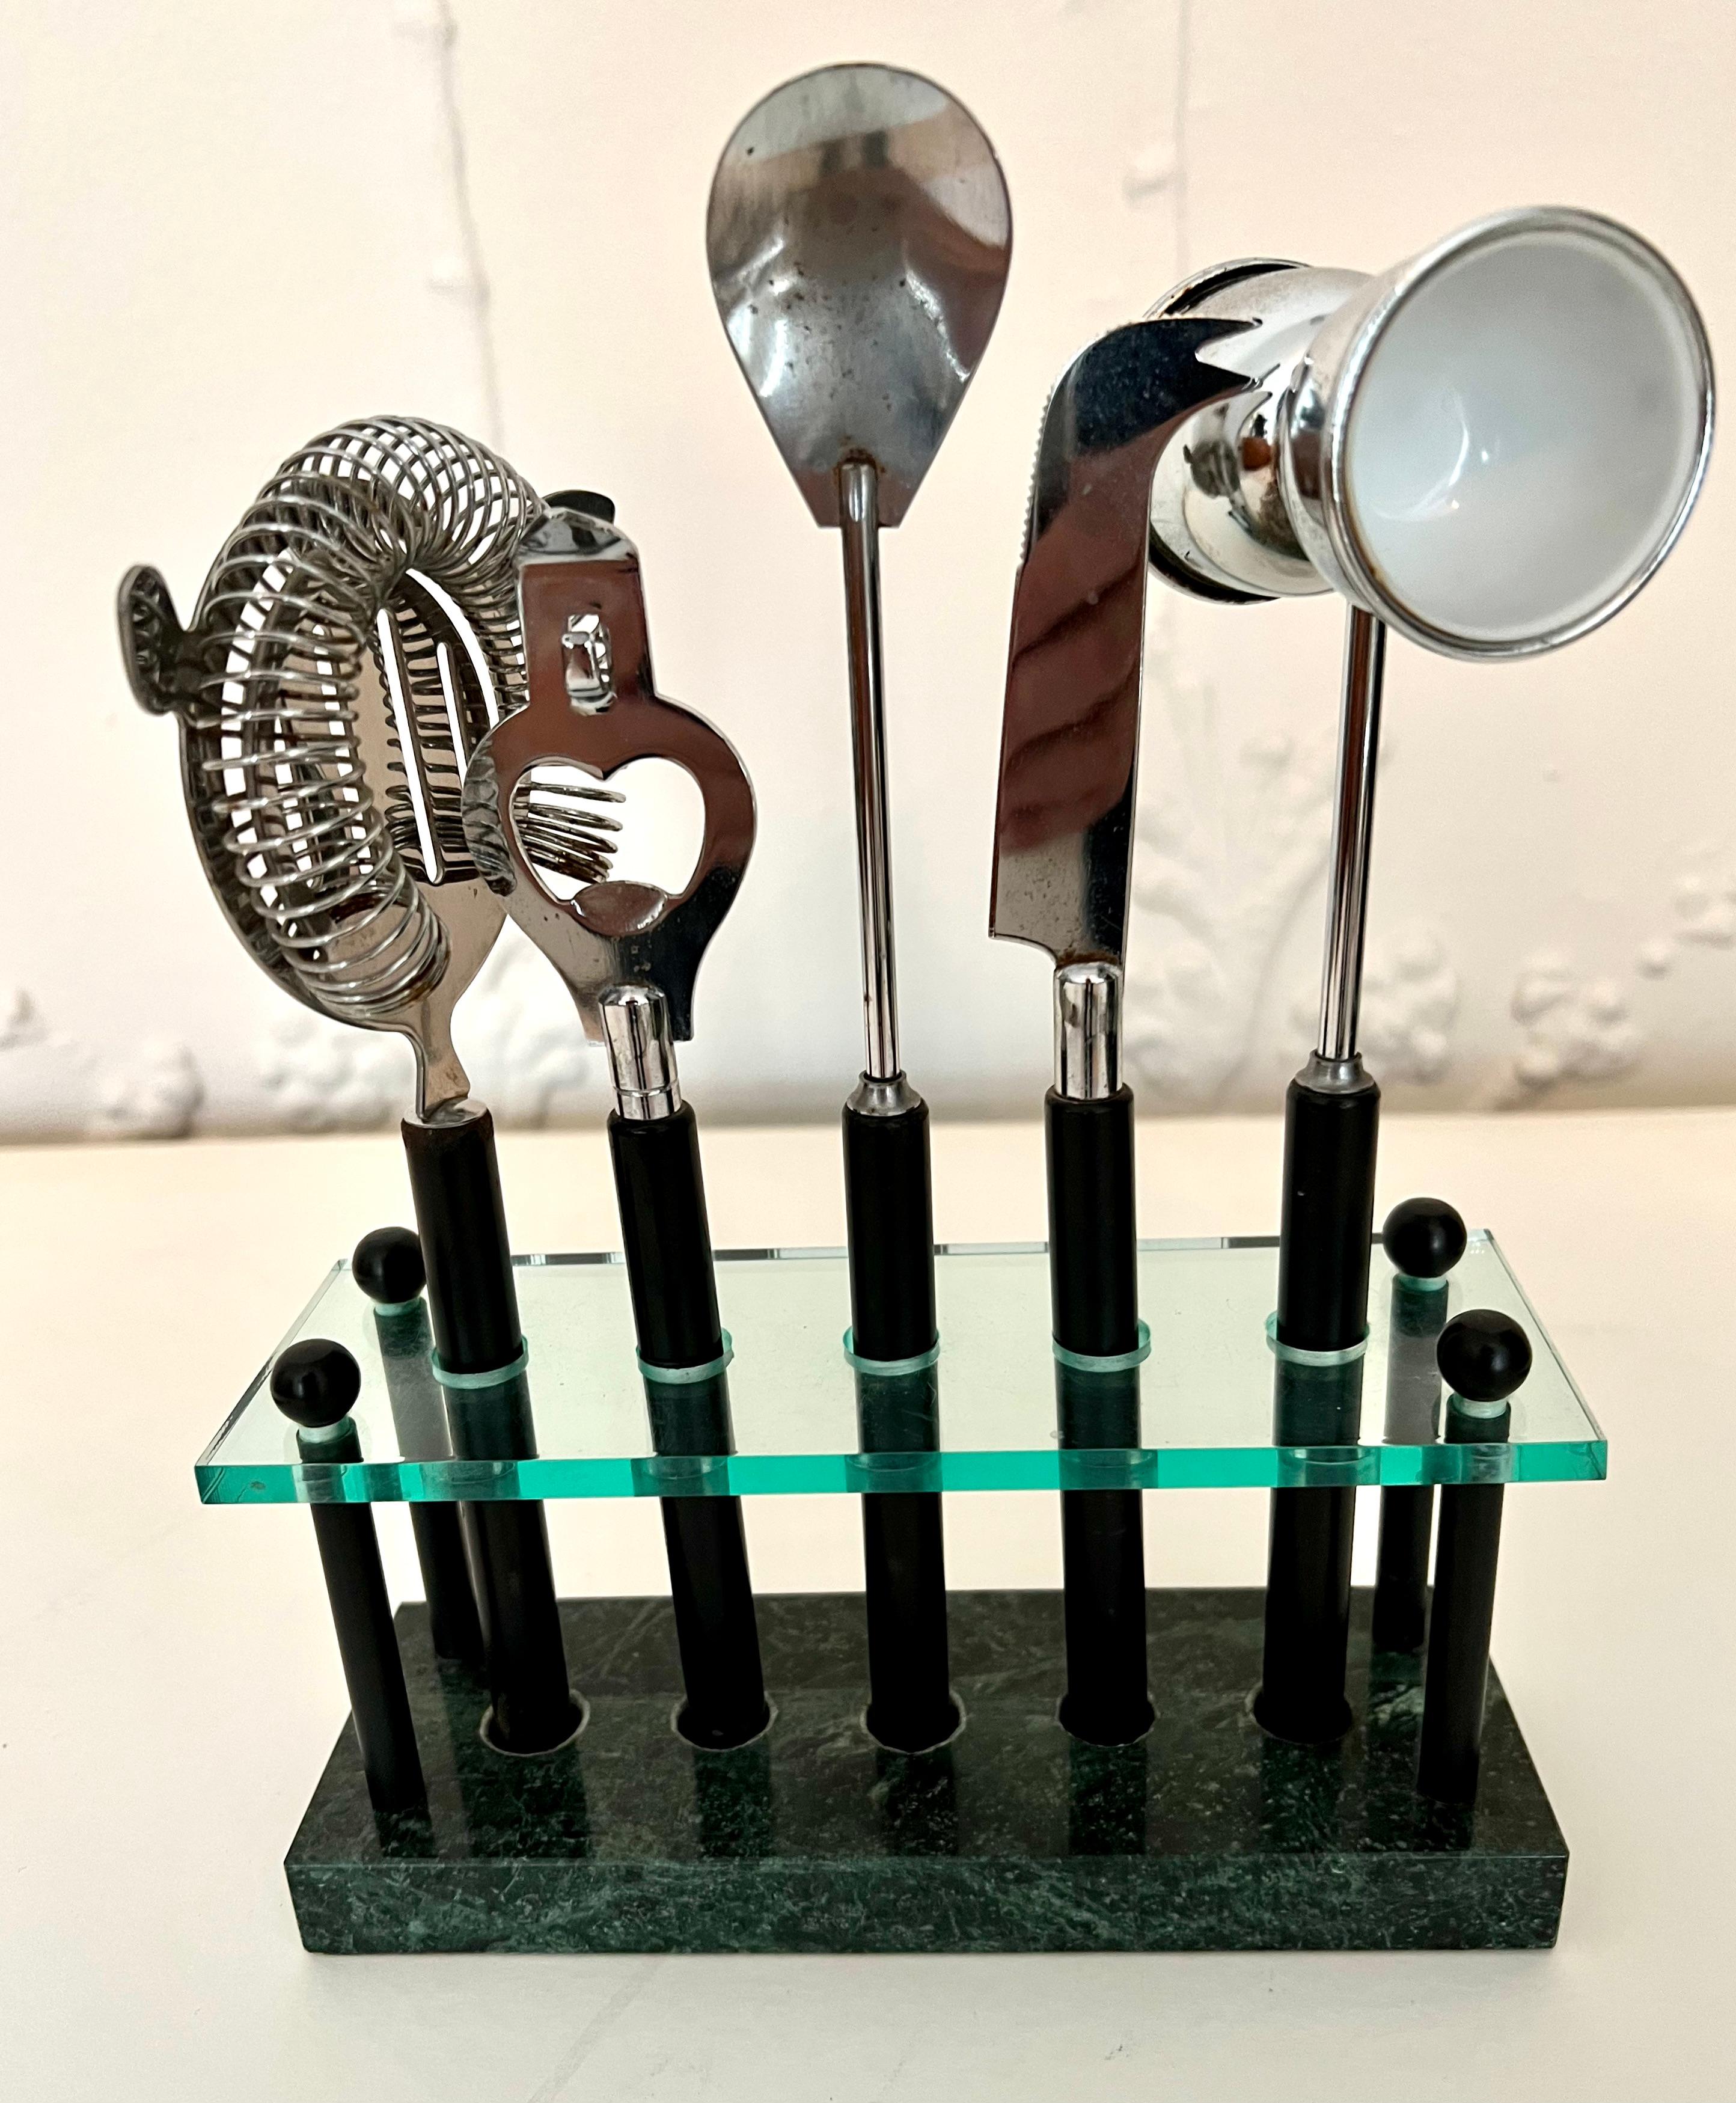 For the Bartender that wants all their accessories at an easy reach - a marble and glass stand that holds a strainer, can/bottle opener, two-sized jigger, spoon and bar knife.

The set is concise, organized and instead of being placed in a